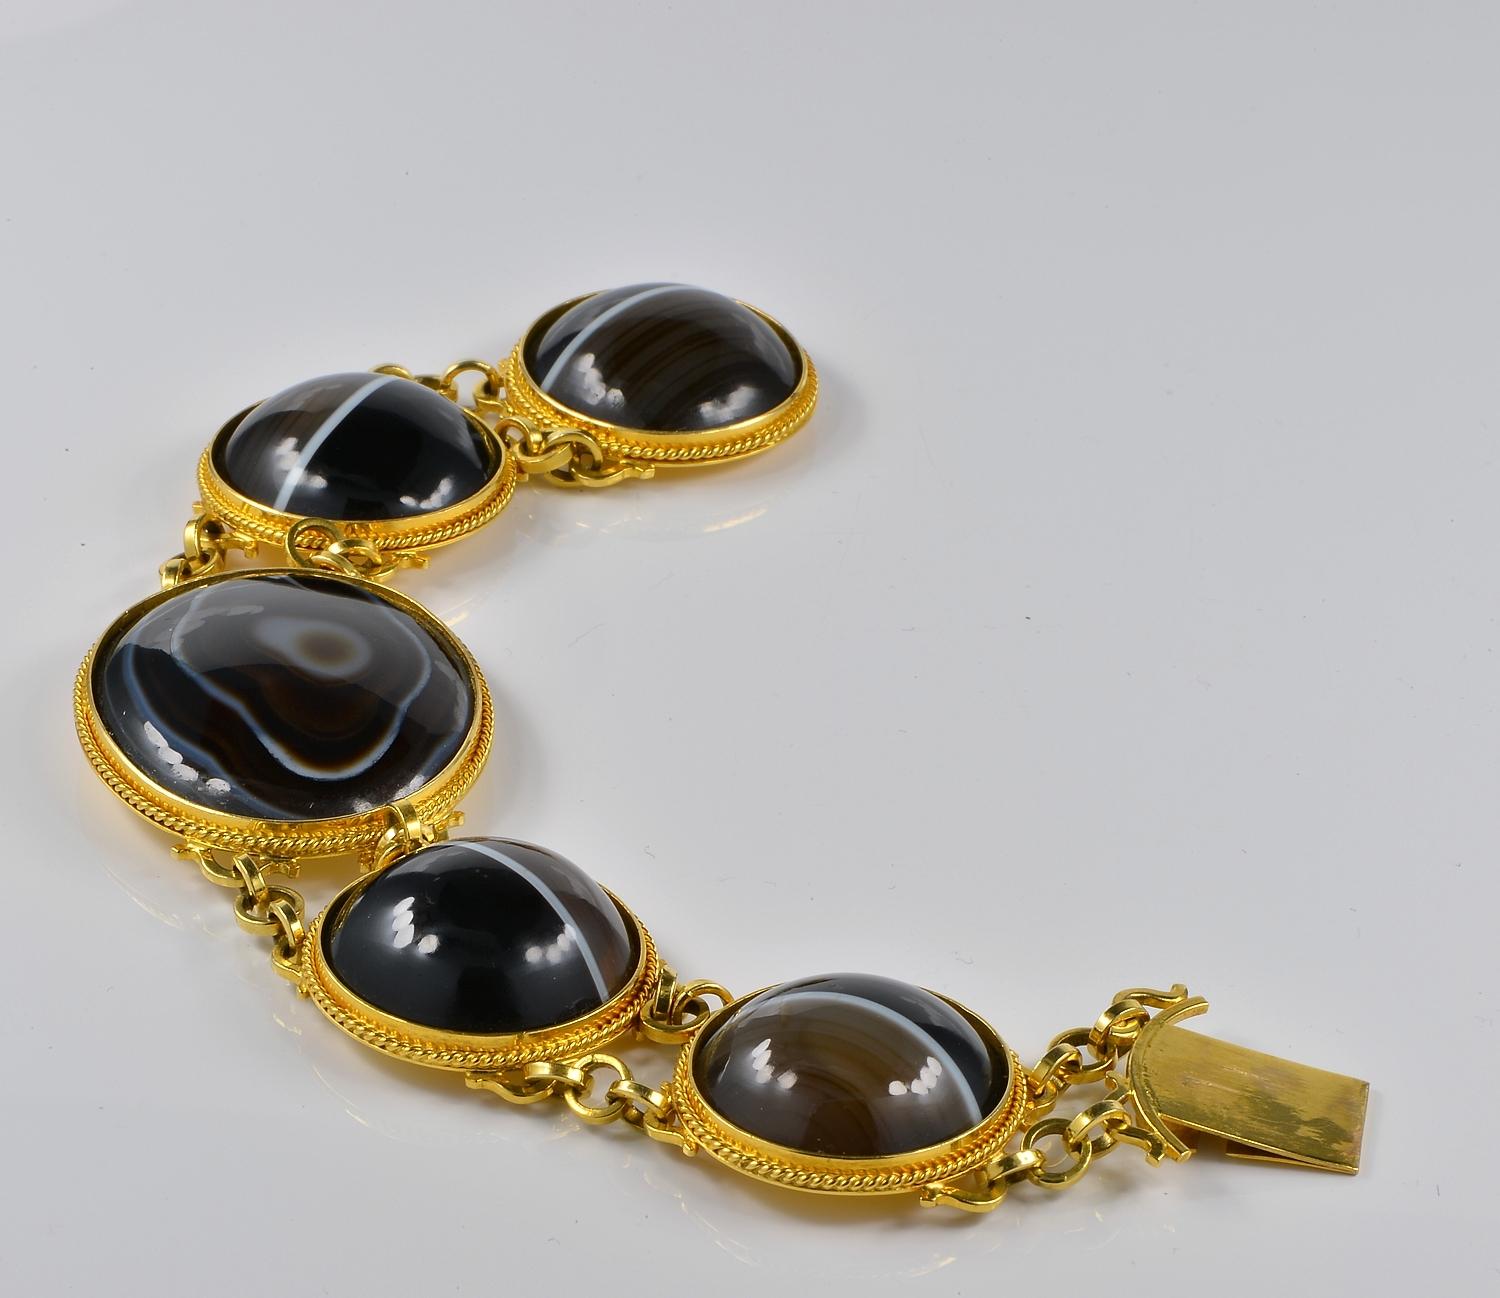 This beautiful bracelet is Georgian period, 1820 ca
Hand crafted of solid 18 kt gold
Consisting of five large oval and round panels set with black banded agate polished sections
Marvelous workmanship displaying each panel in a lovely gold close back